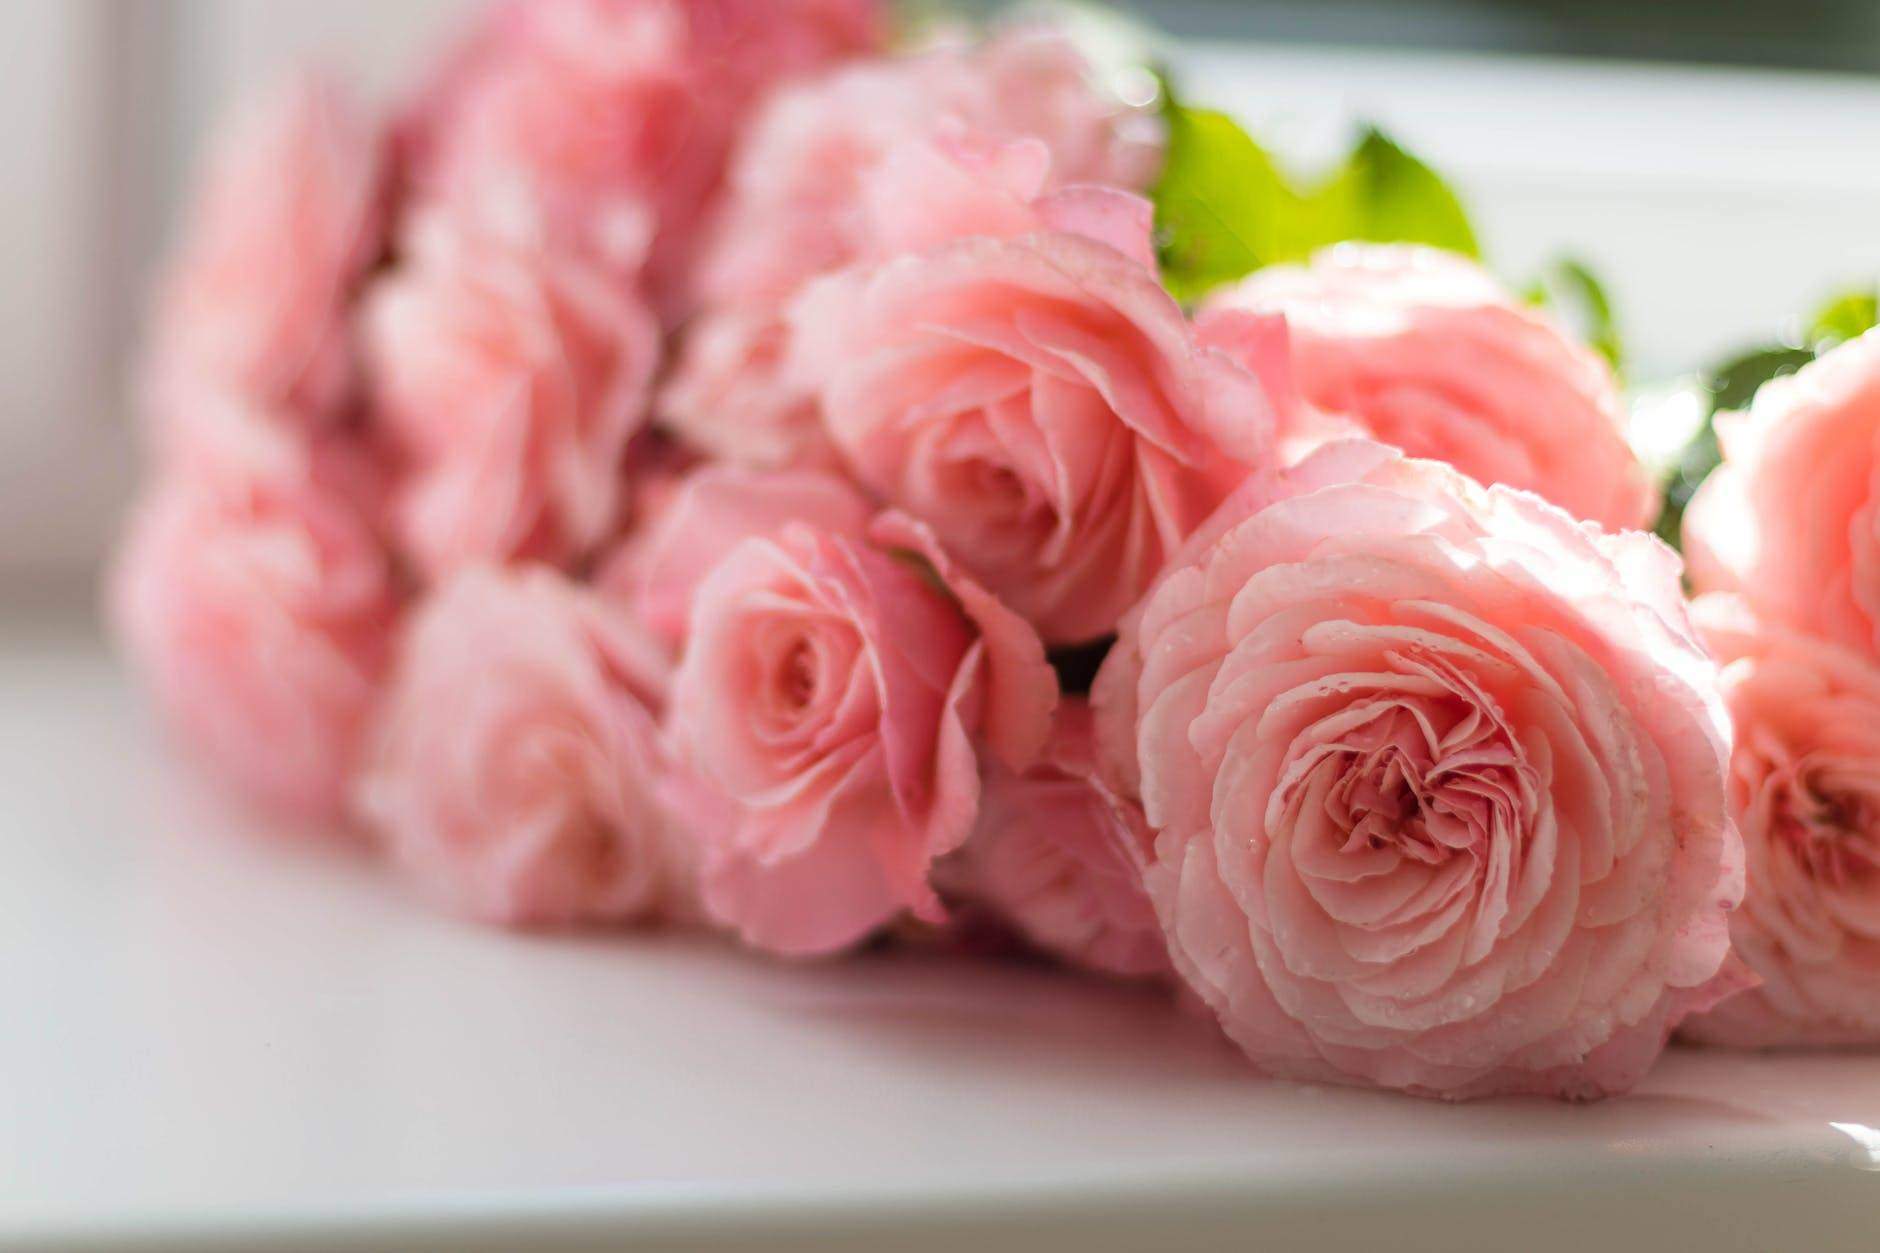 5 Amazing Flowers to Make Anyone’s Day